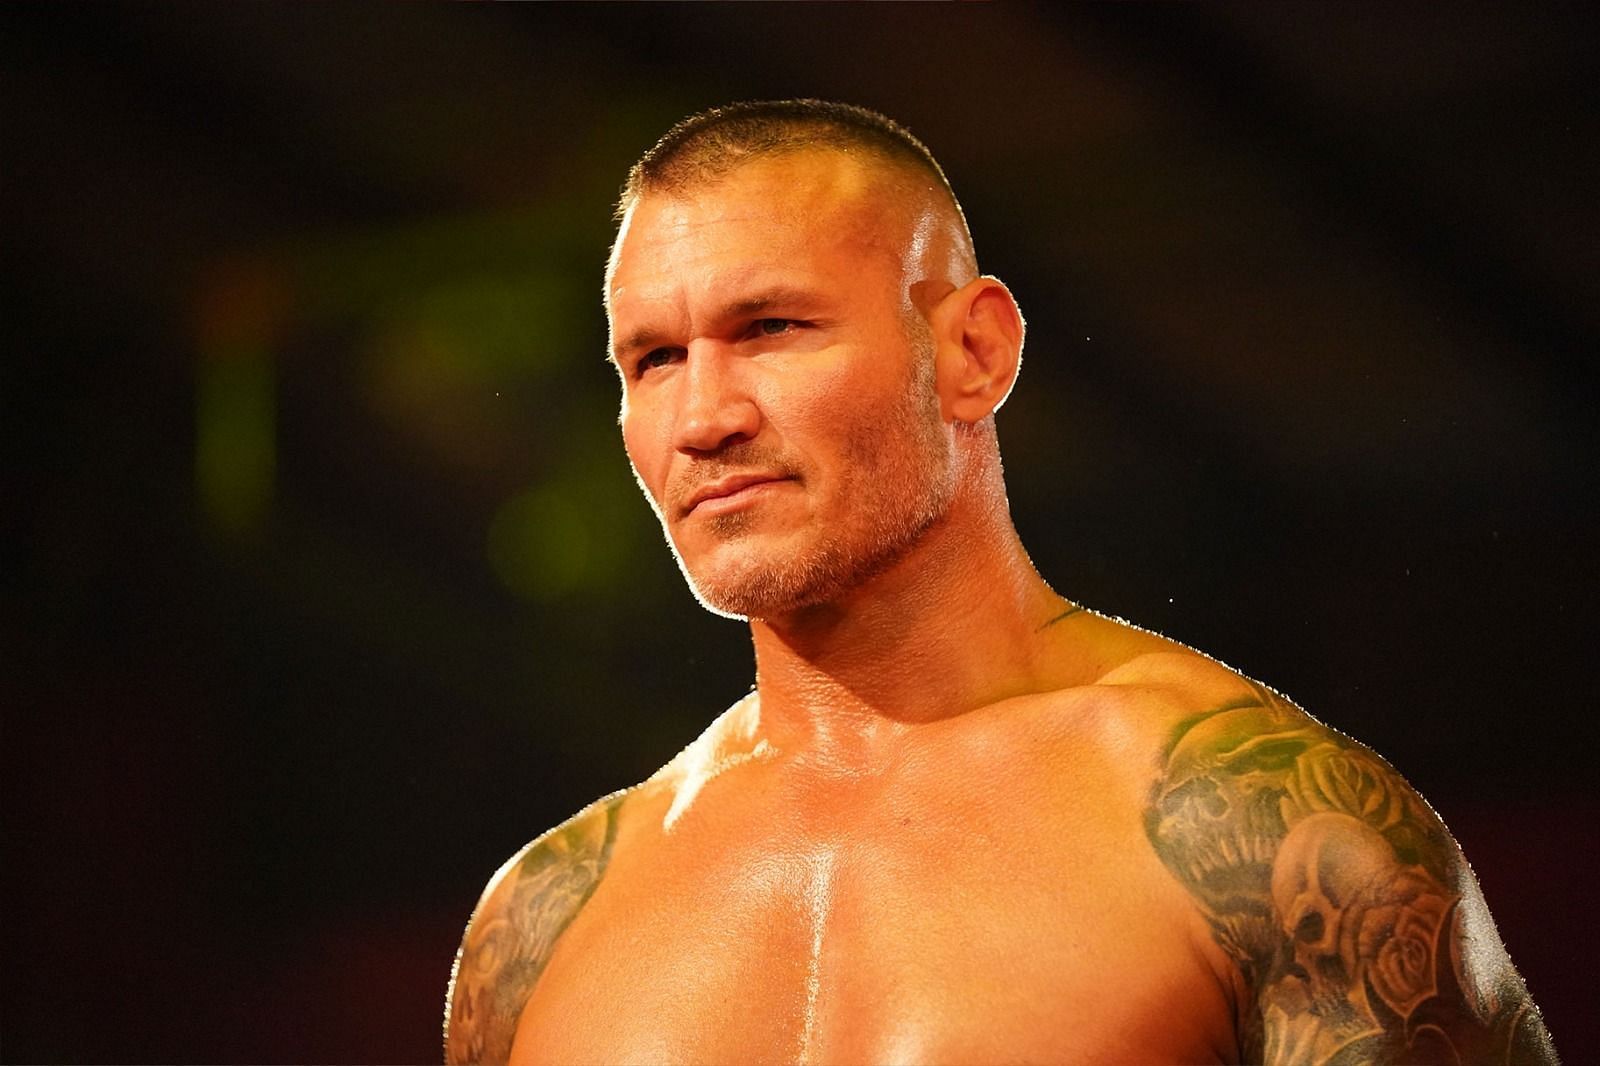 Randy Orton is a very big name in the wrestling world